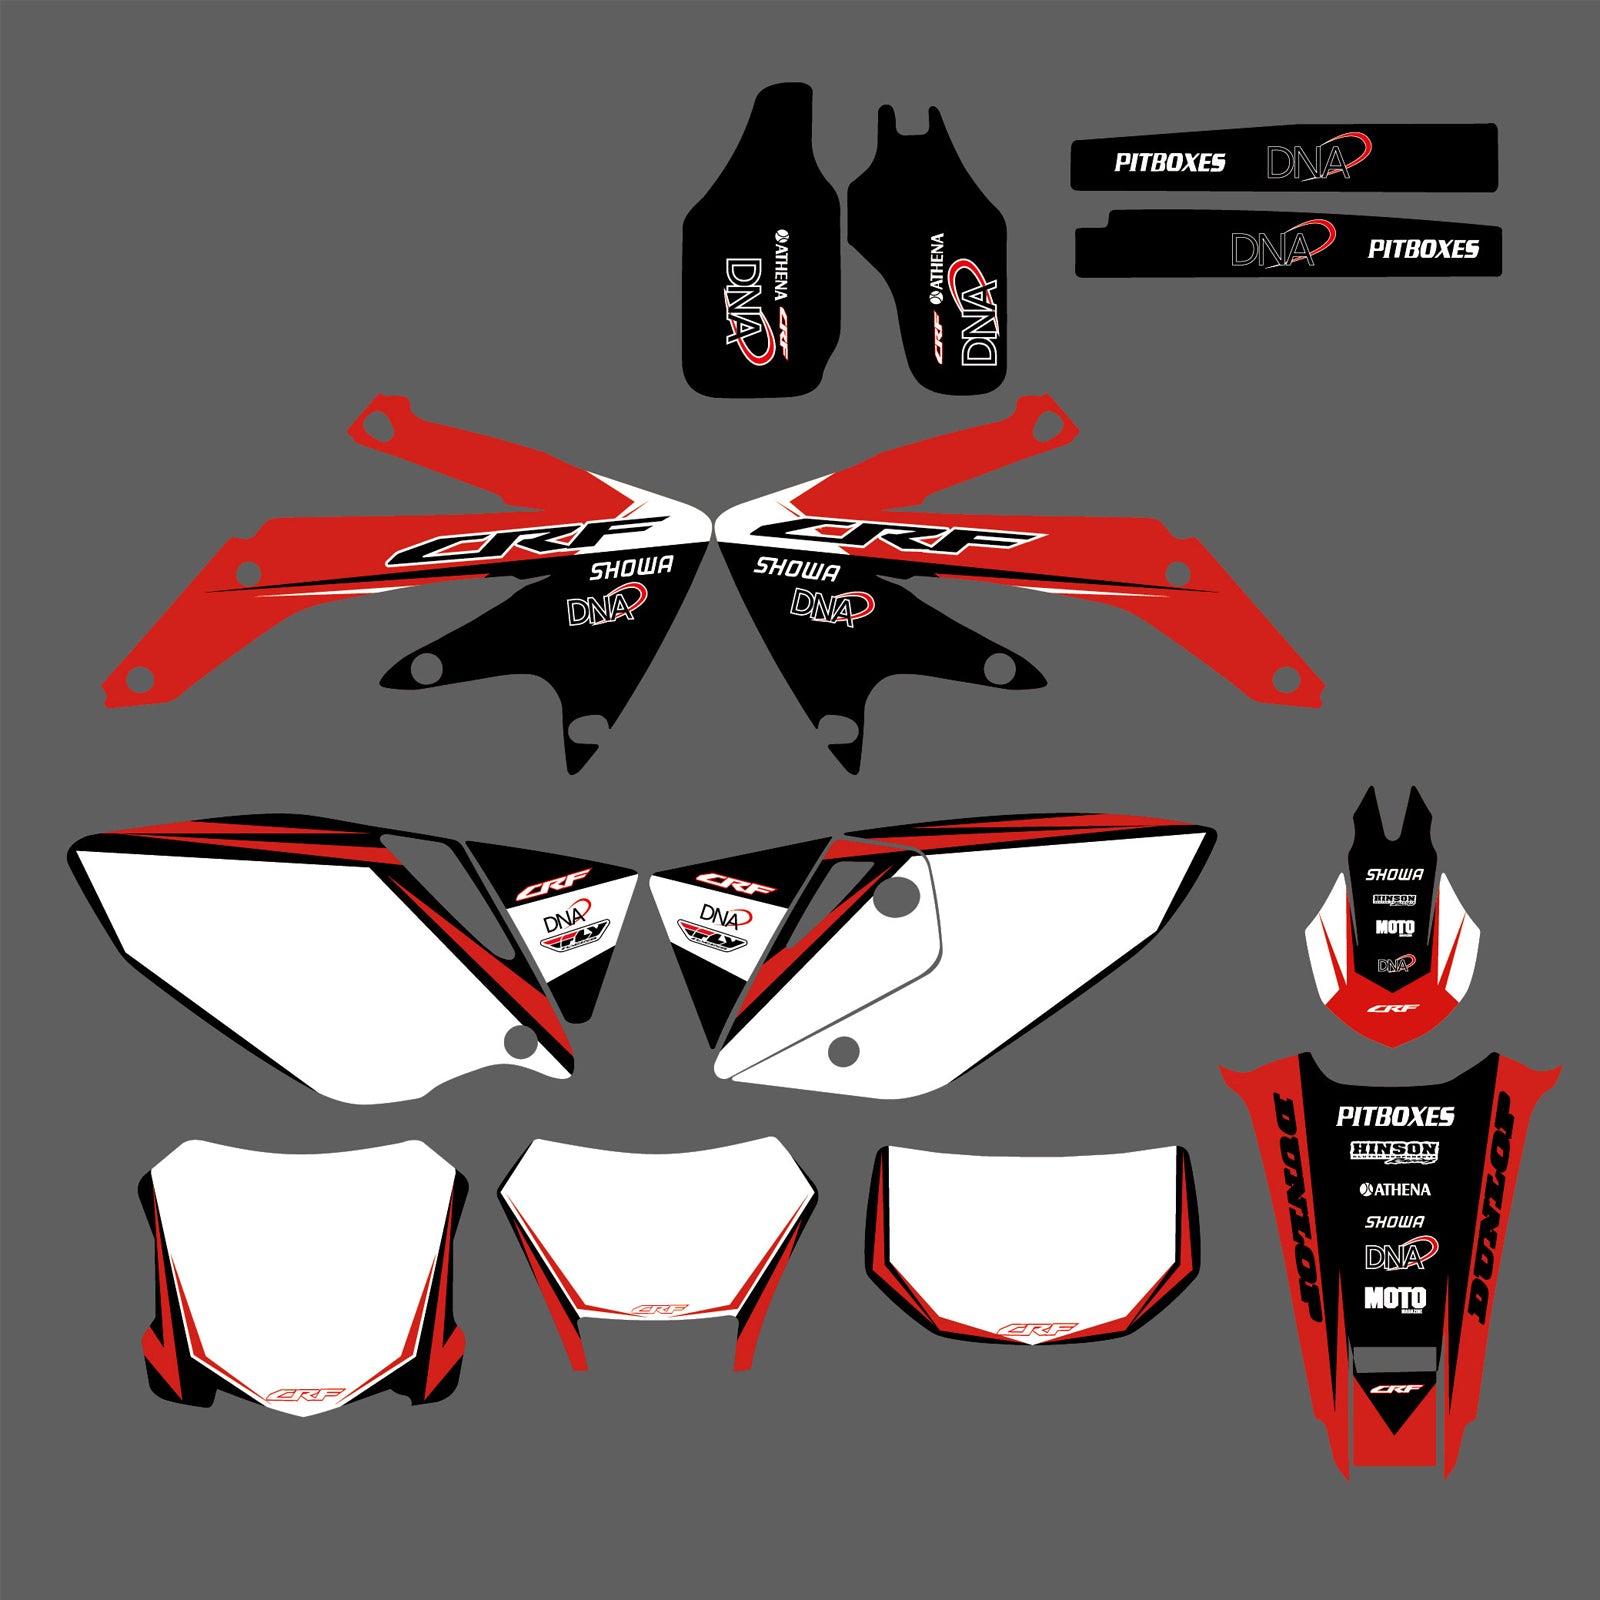 Team Graphics Decals Stickers Kit For Honda CRF450X 2005-2016